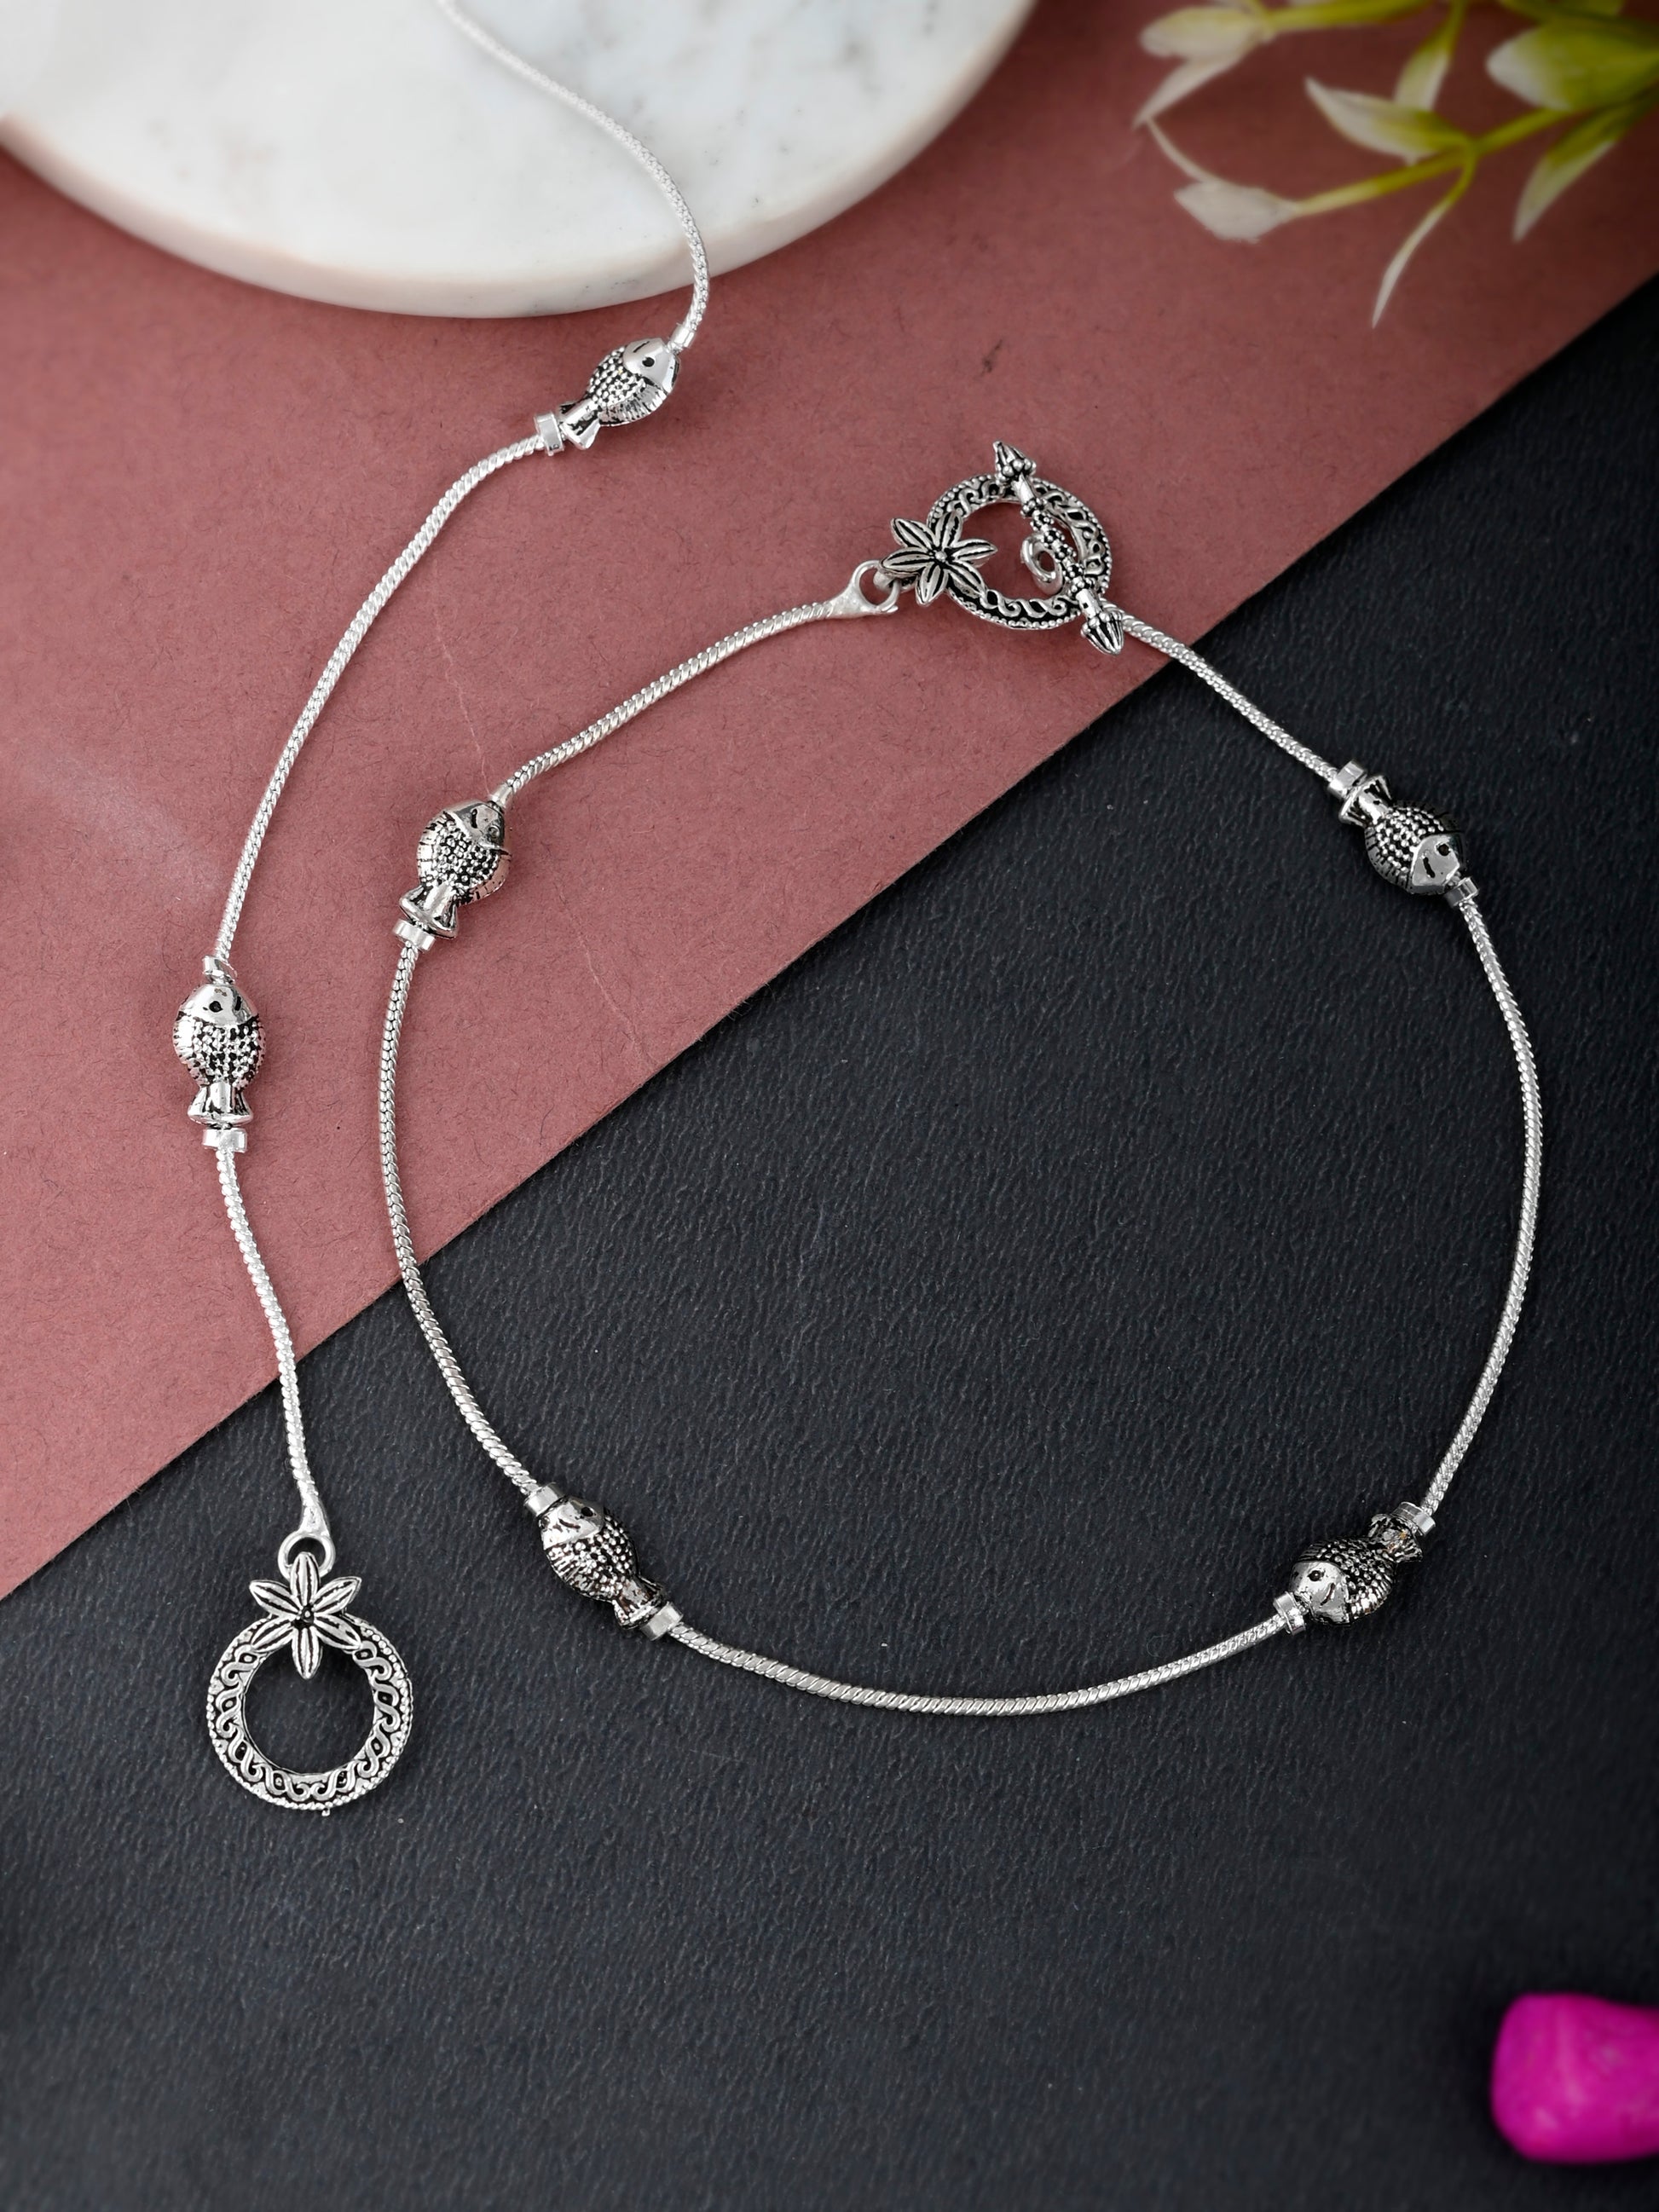 Silver Toned Handcrafted Anklet With Fish Charm Beads for Women Online